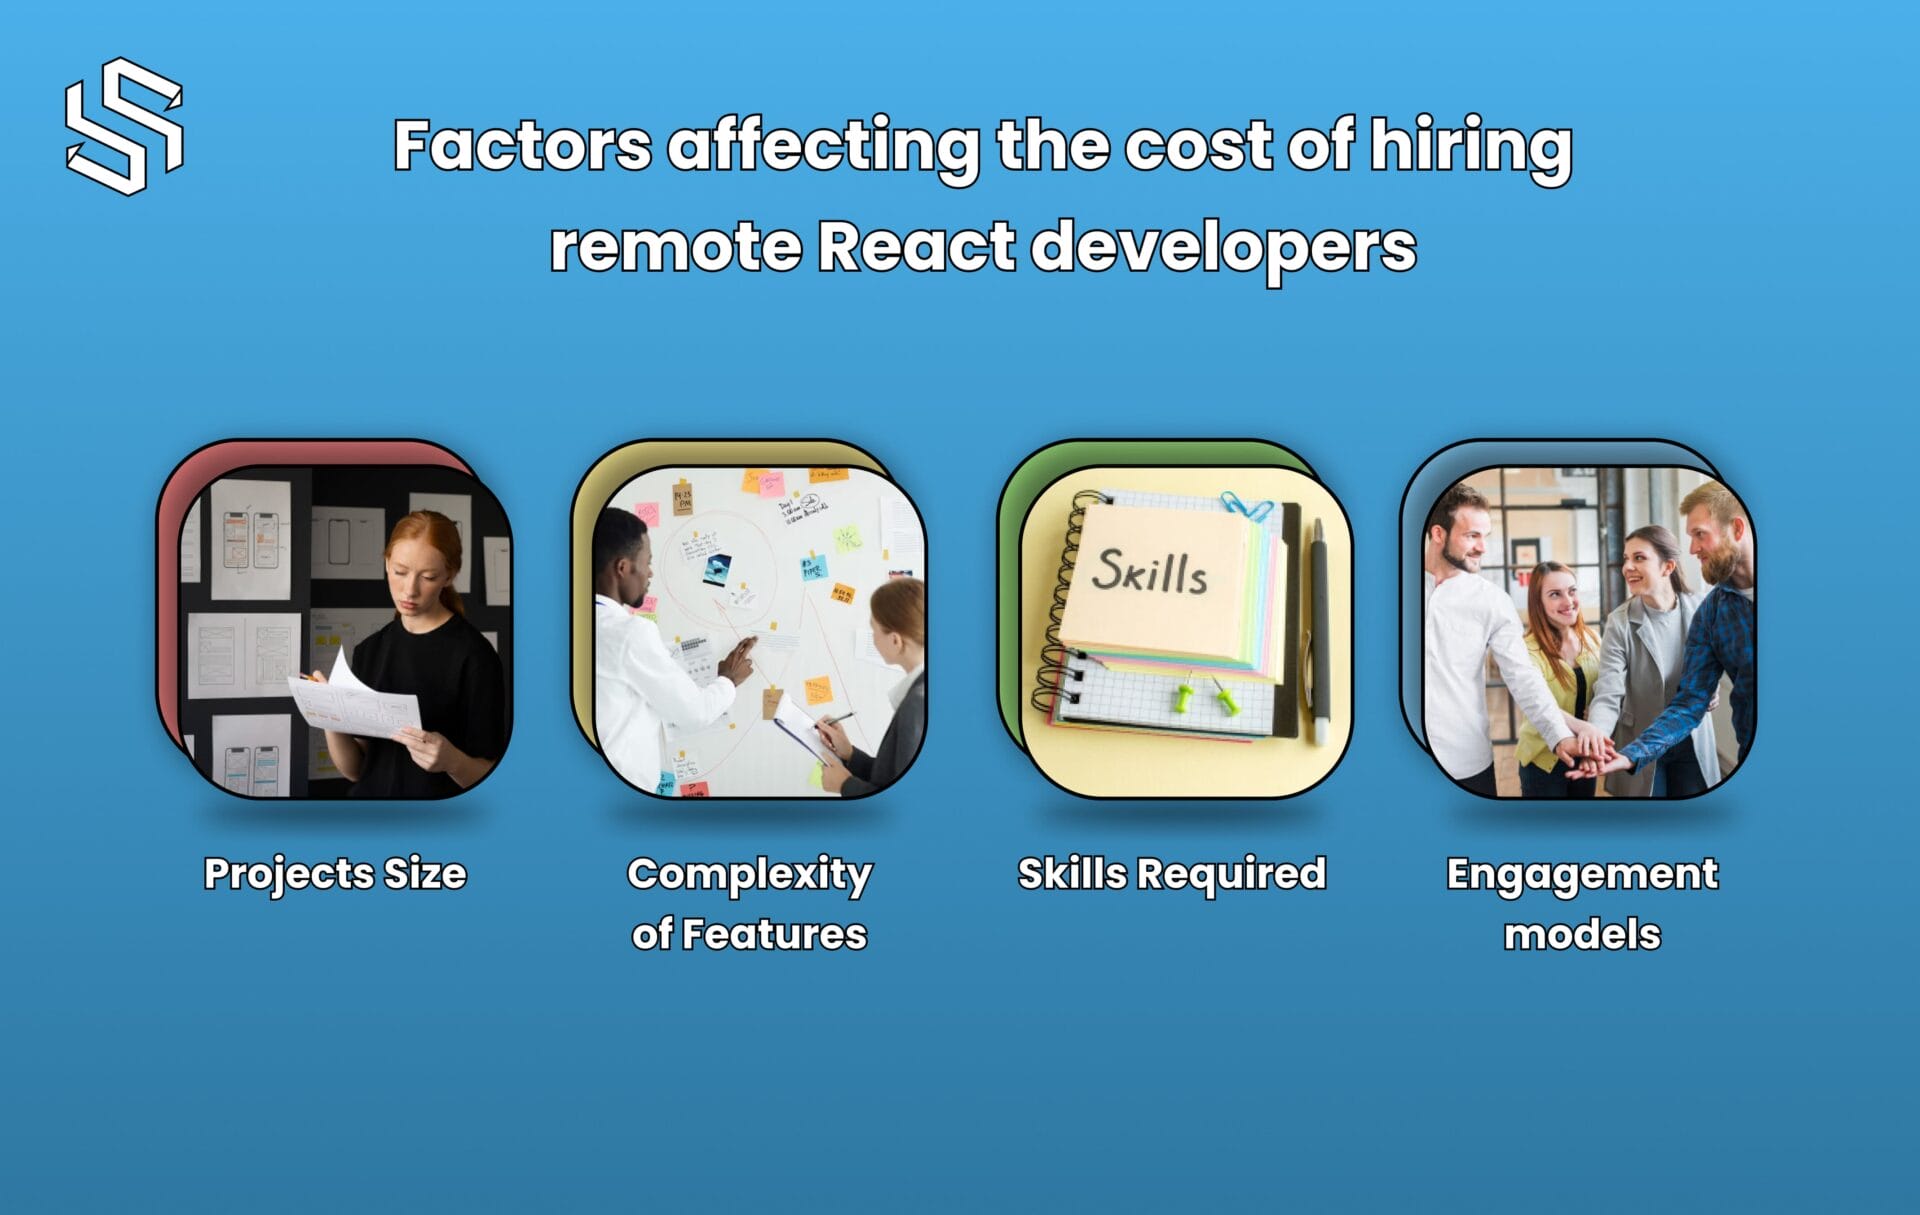 Factors that affect the cost of hiring remote React developers